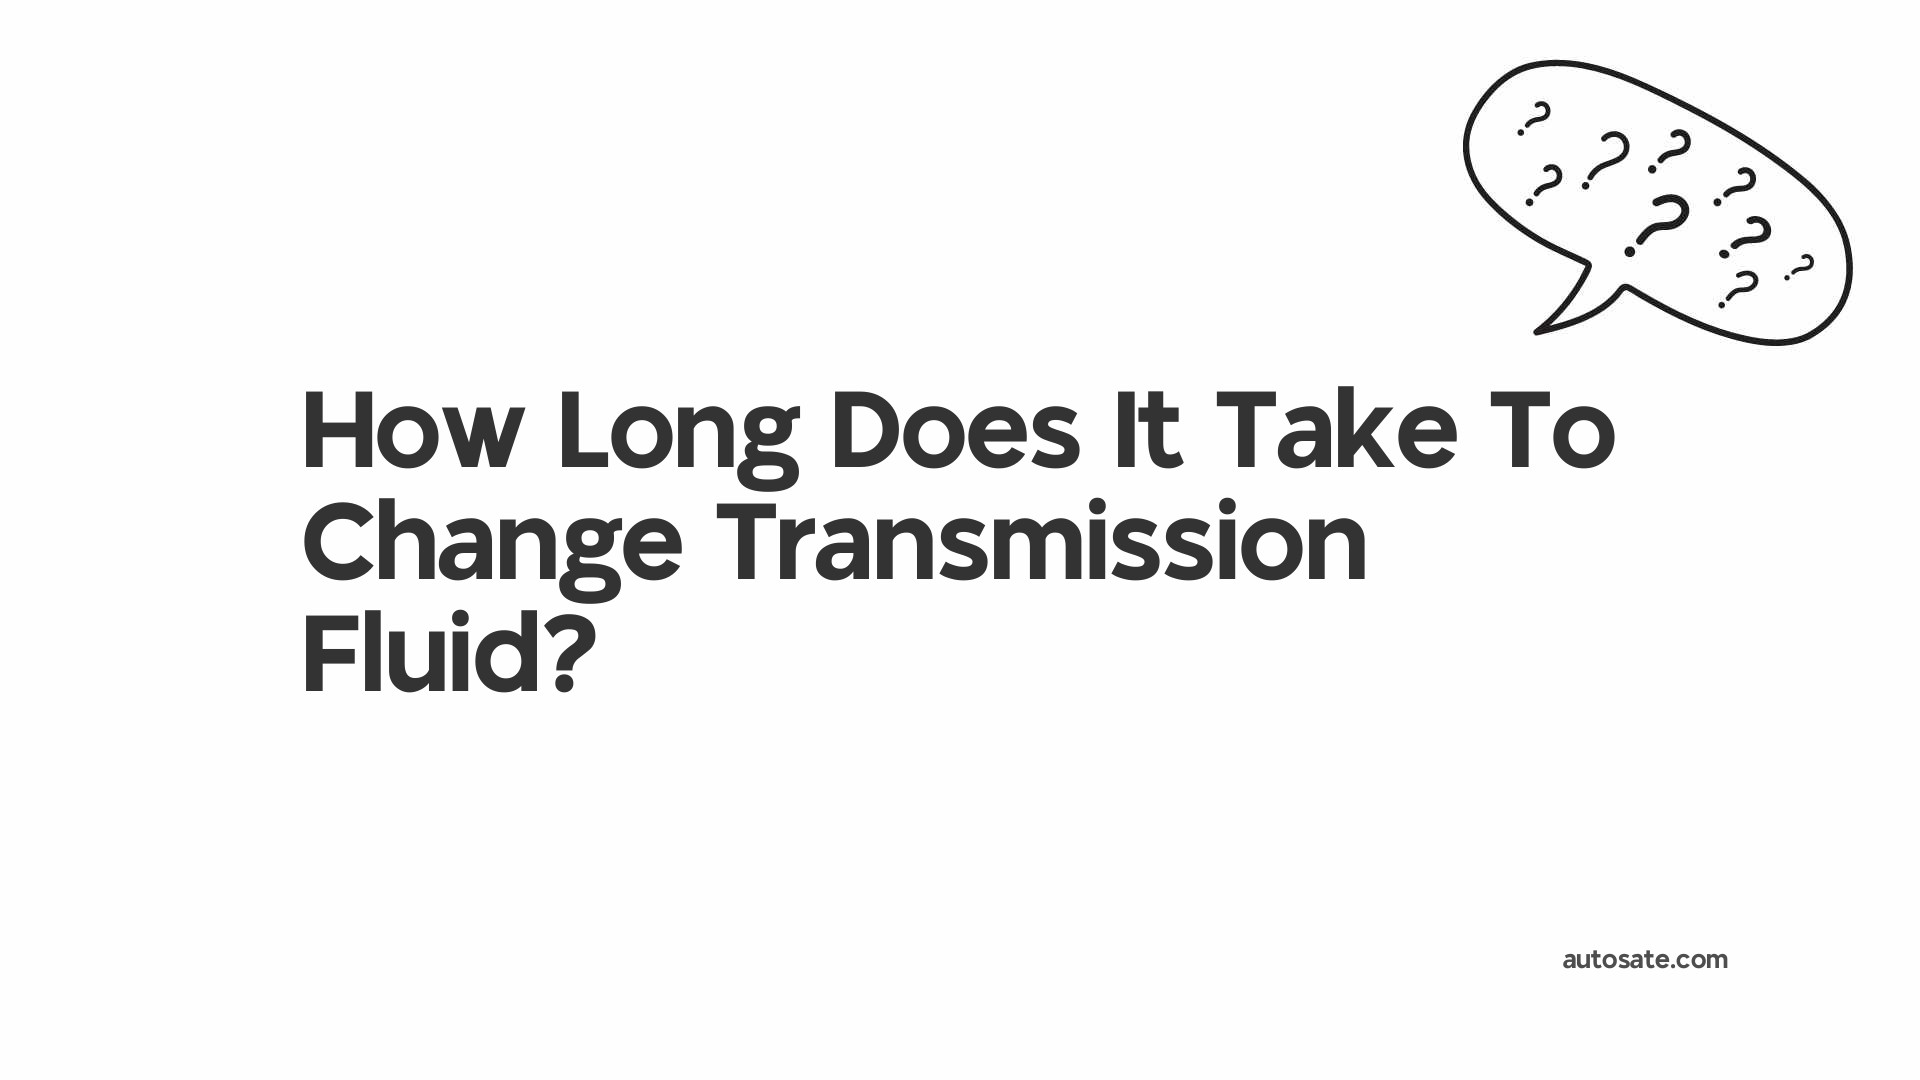 How Long Does It Take To Change Transmission Fluid?